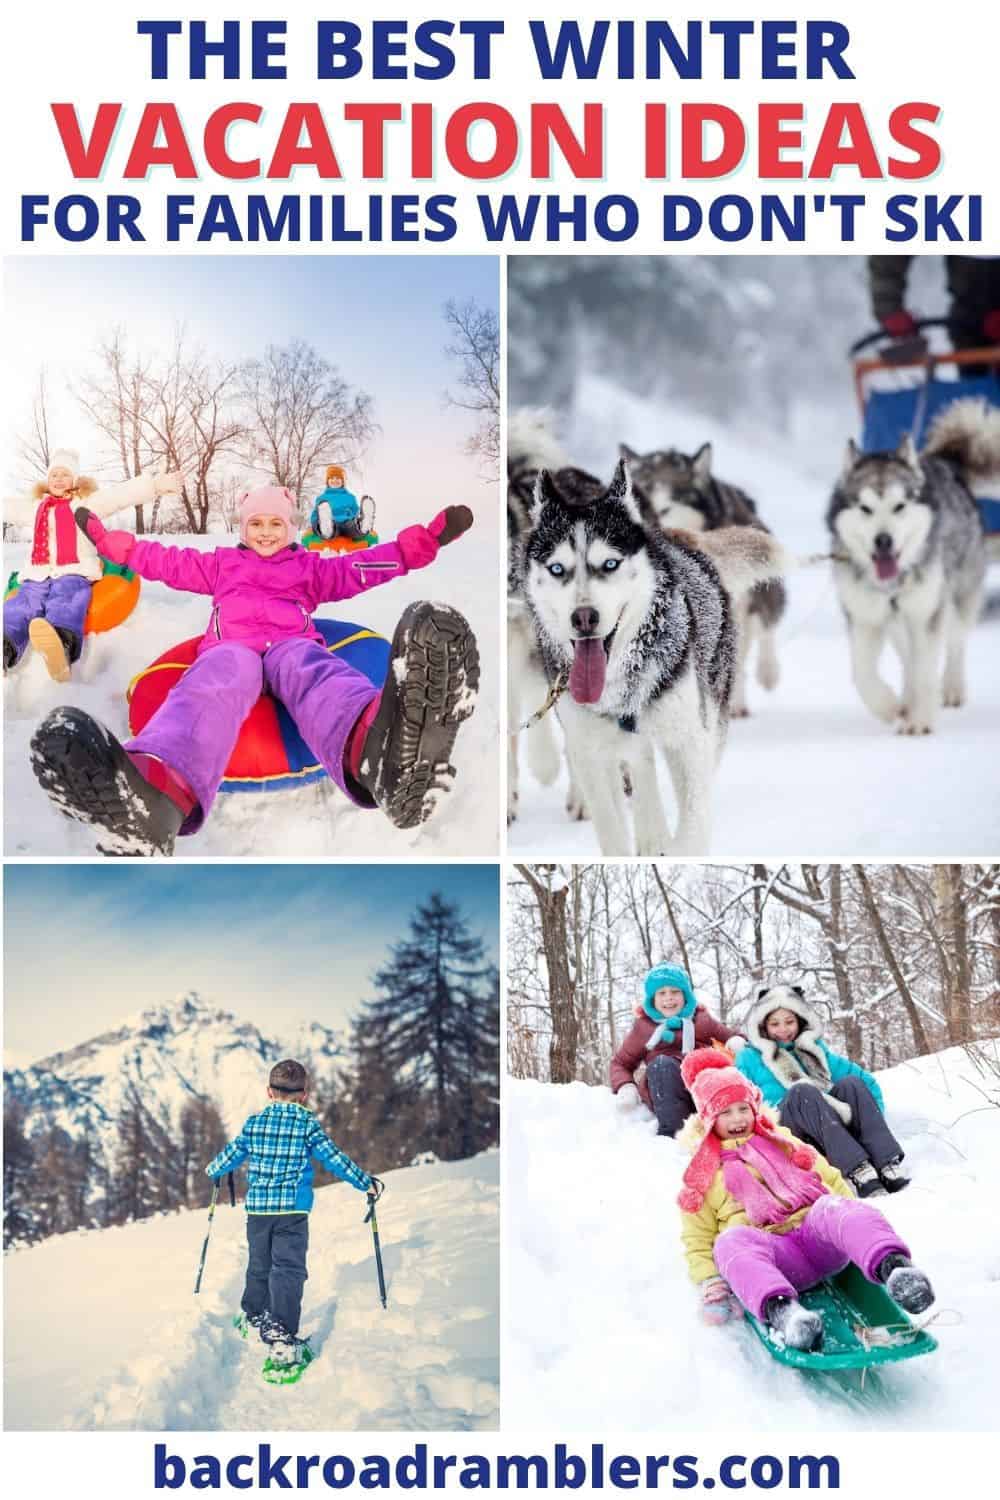 A collage of photos featuring kids playing in the snow on winter vacations. Text overlay: The best winter vacation ideas for families who don't ski.